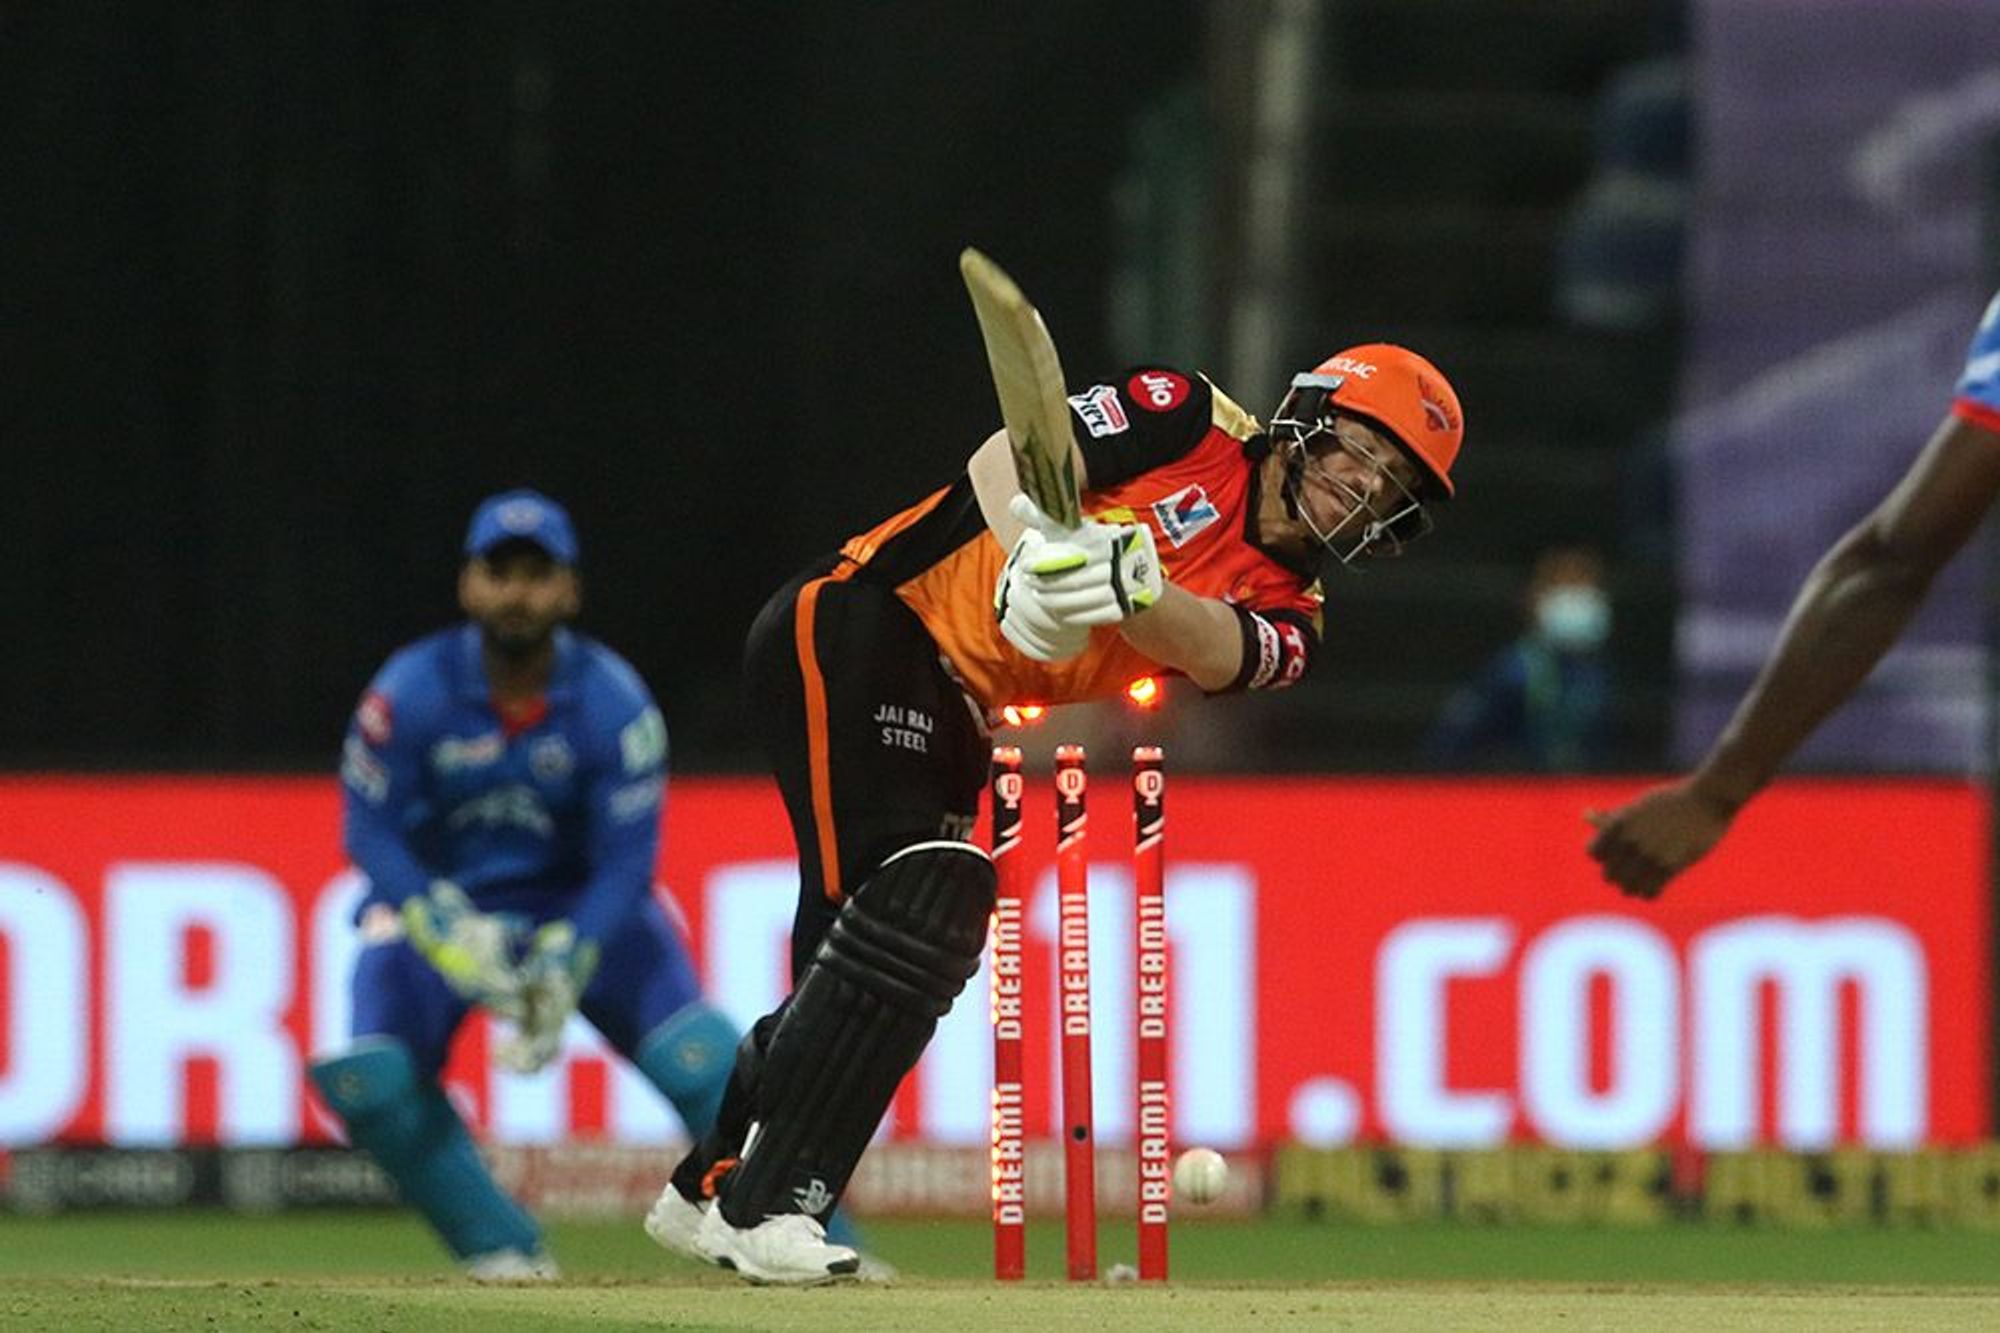 IPL 2020: I'm proud to be where we are today says warner